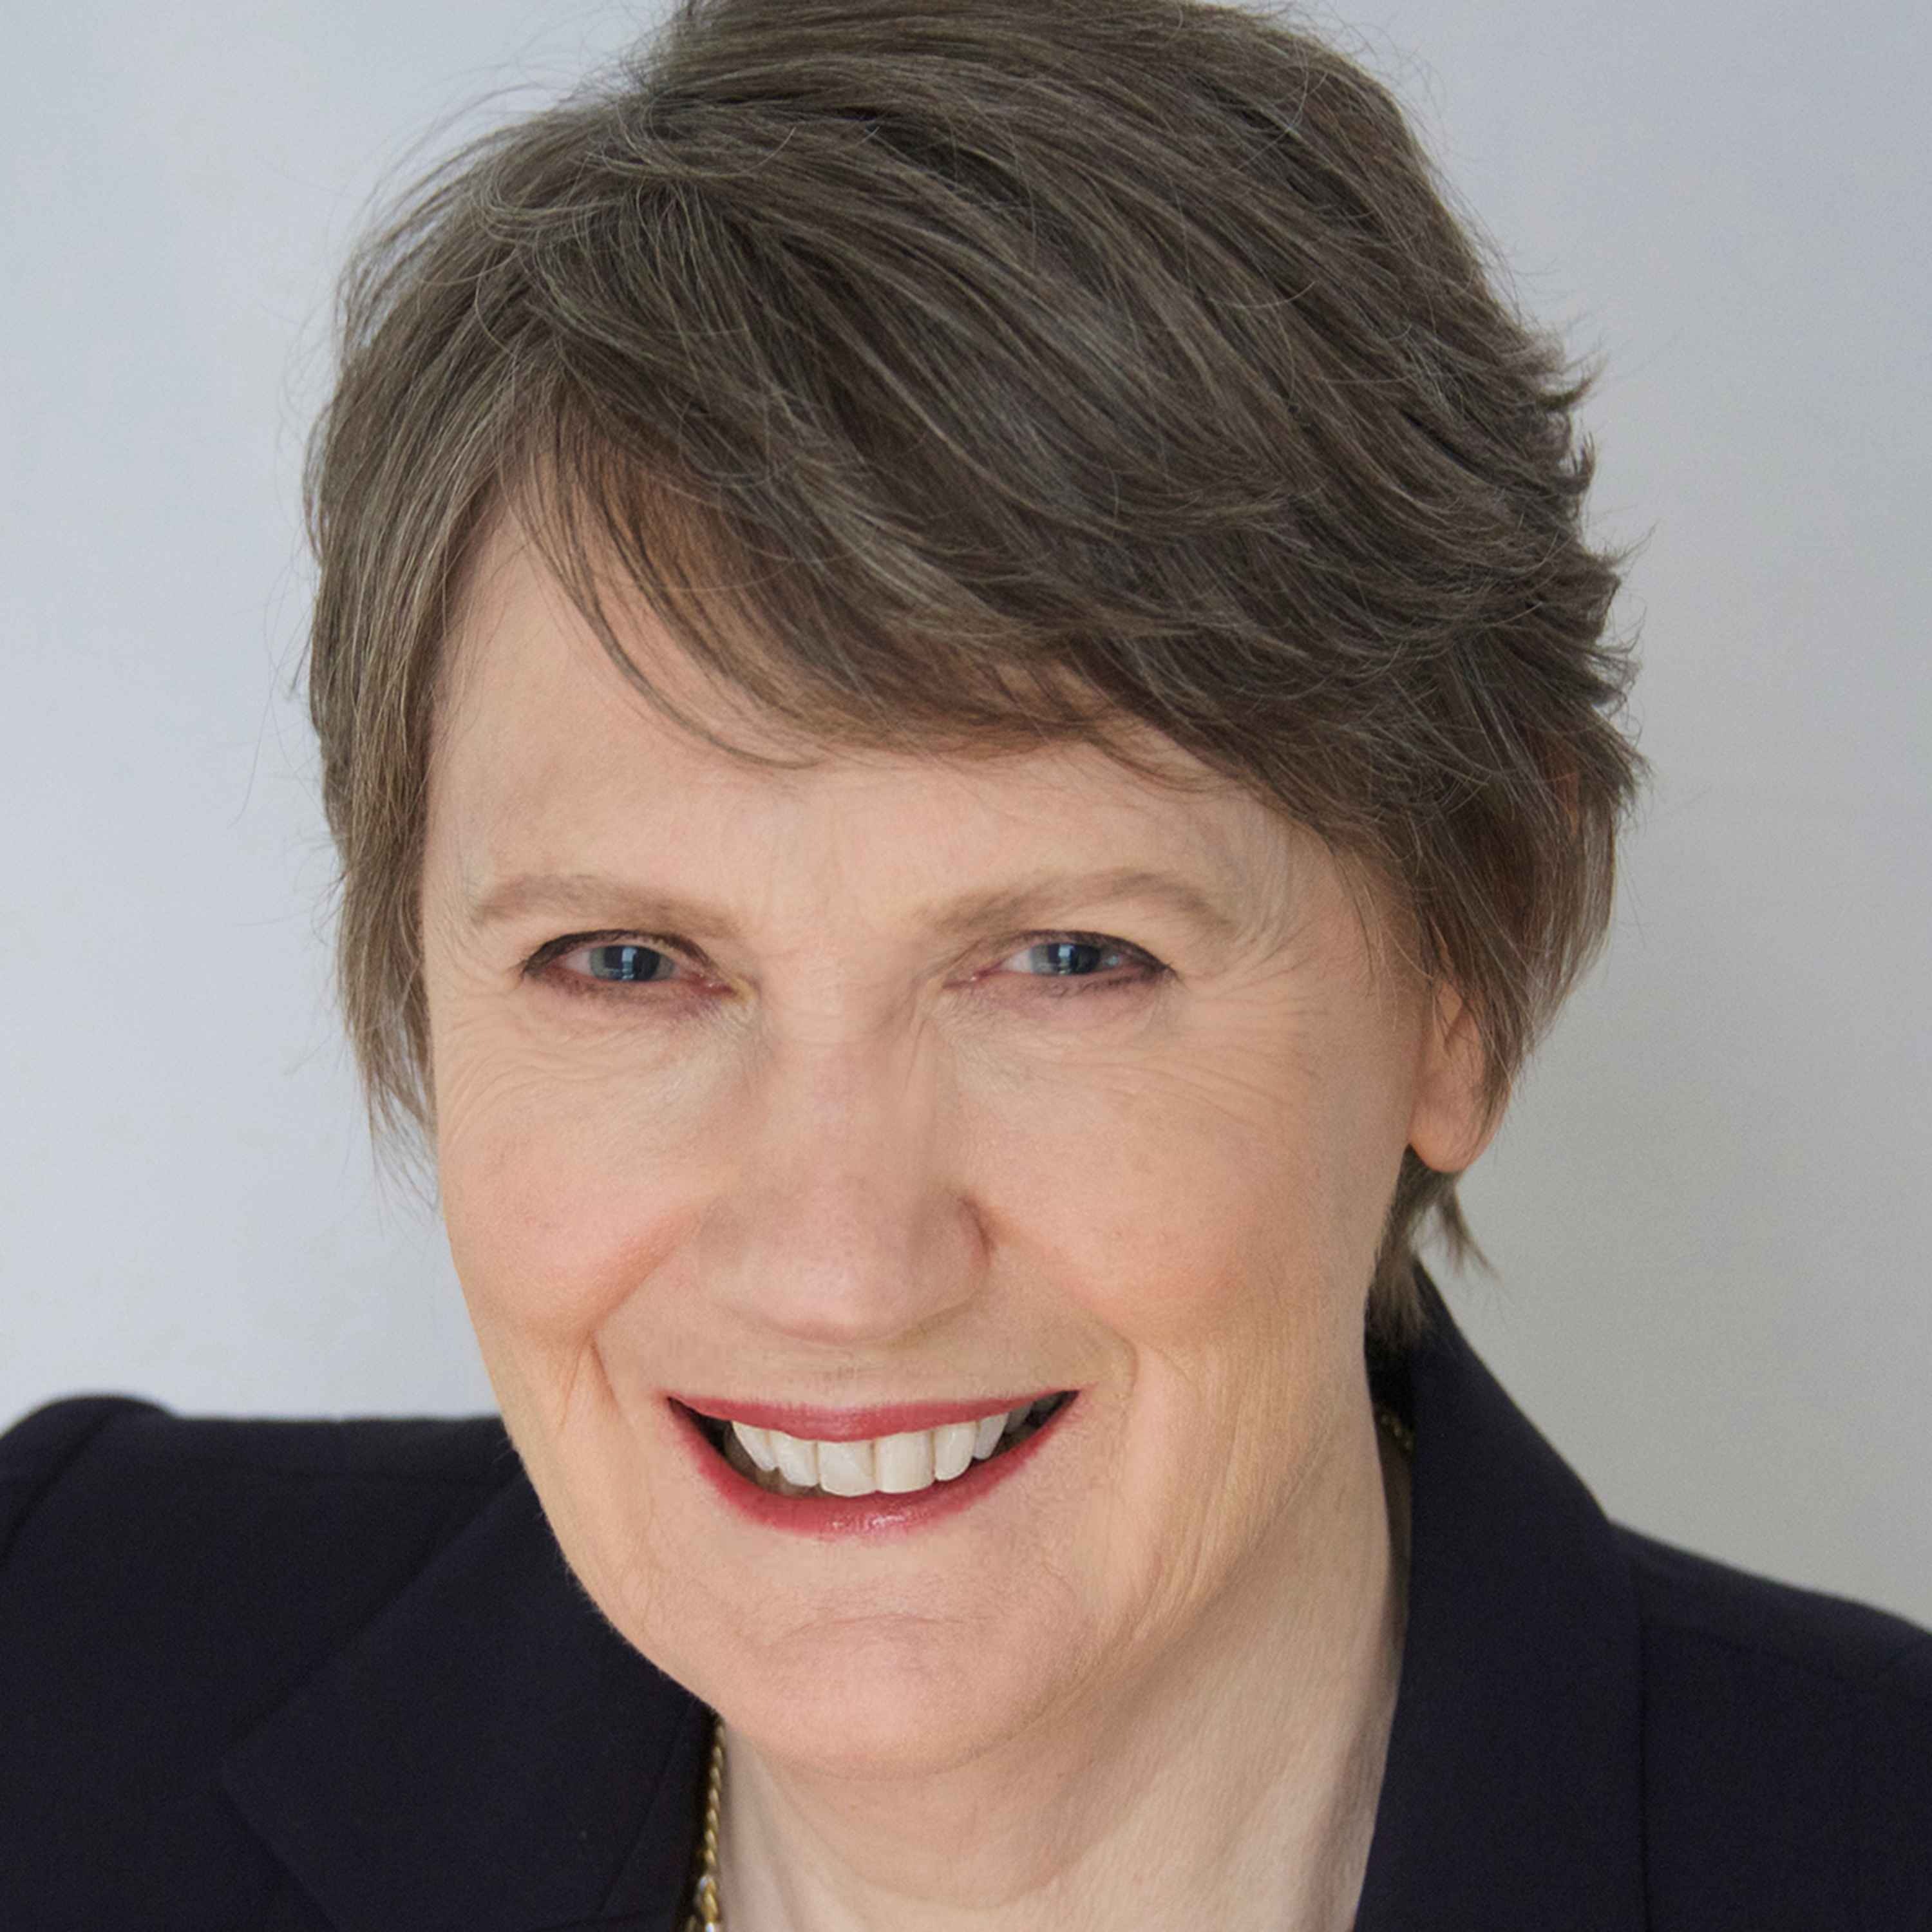 “FOR HEAVEN’S SAKE, GET PREPARED!” – With Helen Clark, Former PM of New Zealand